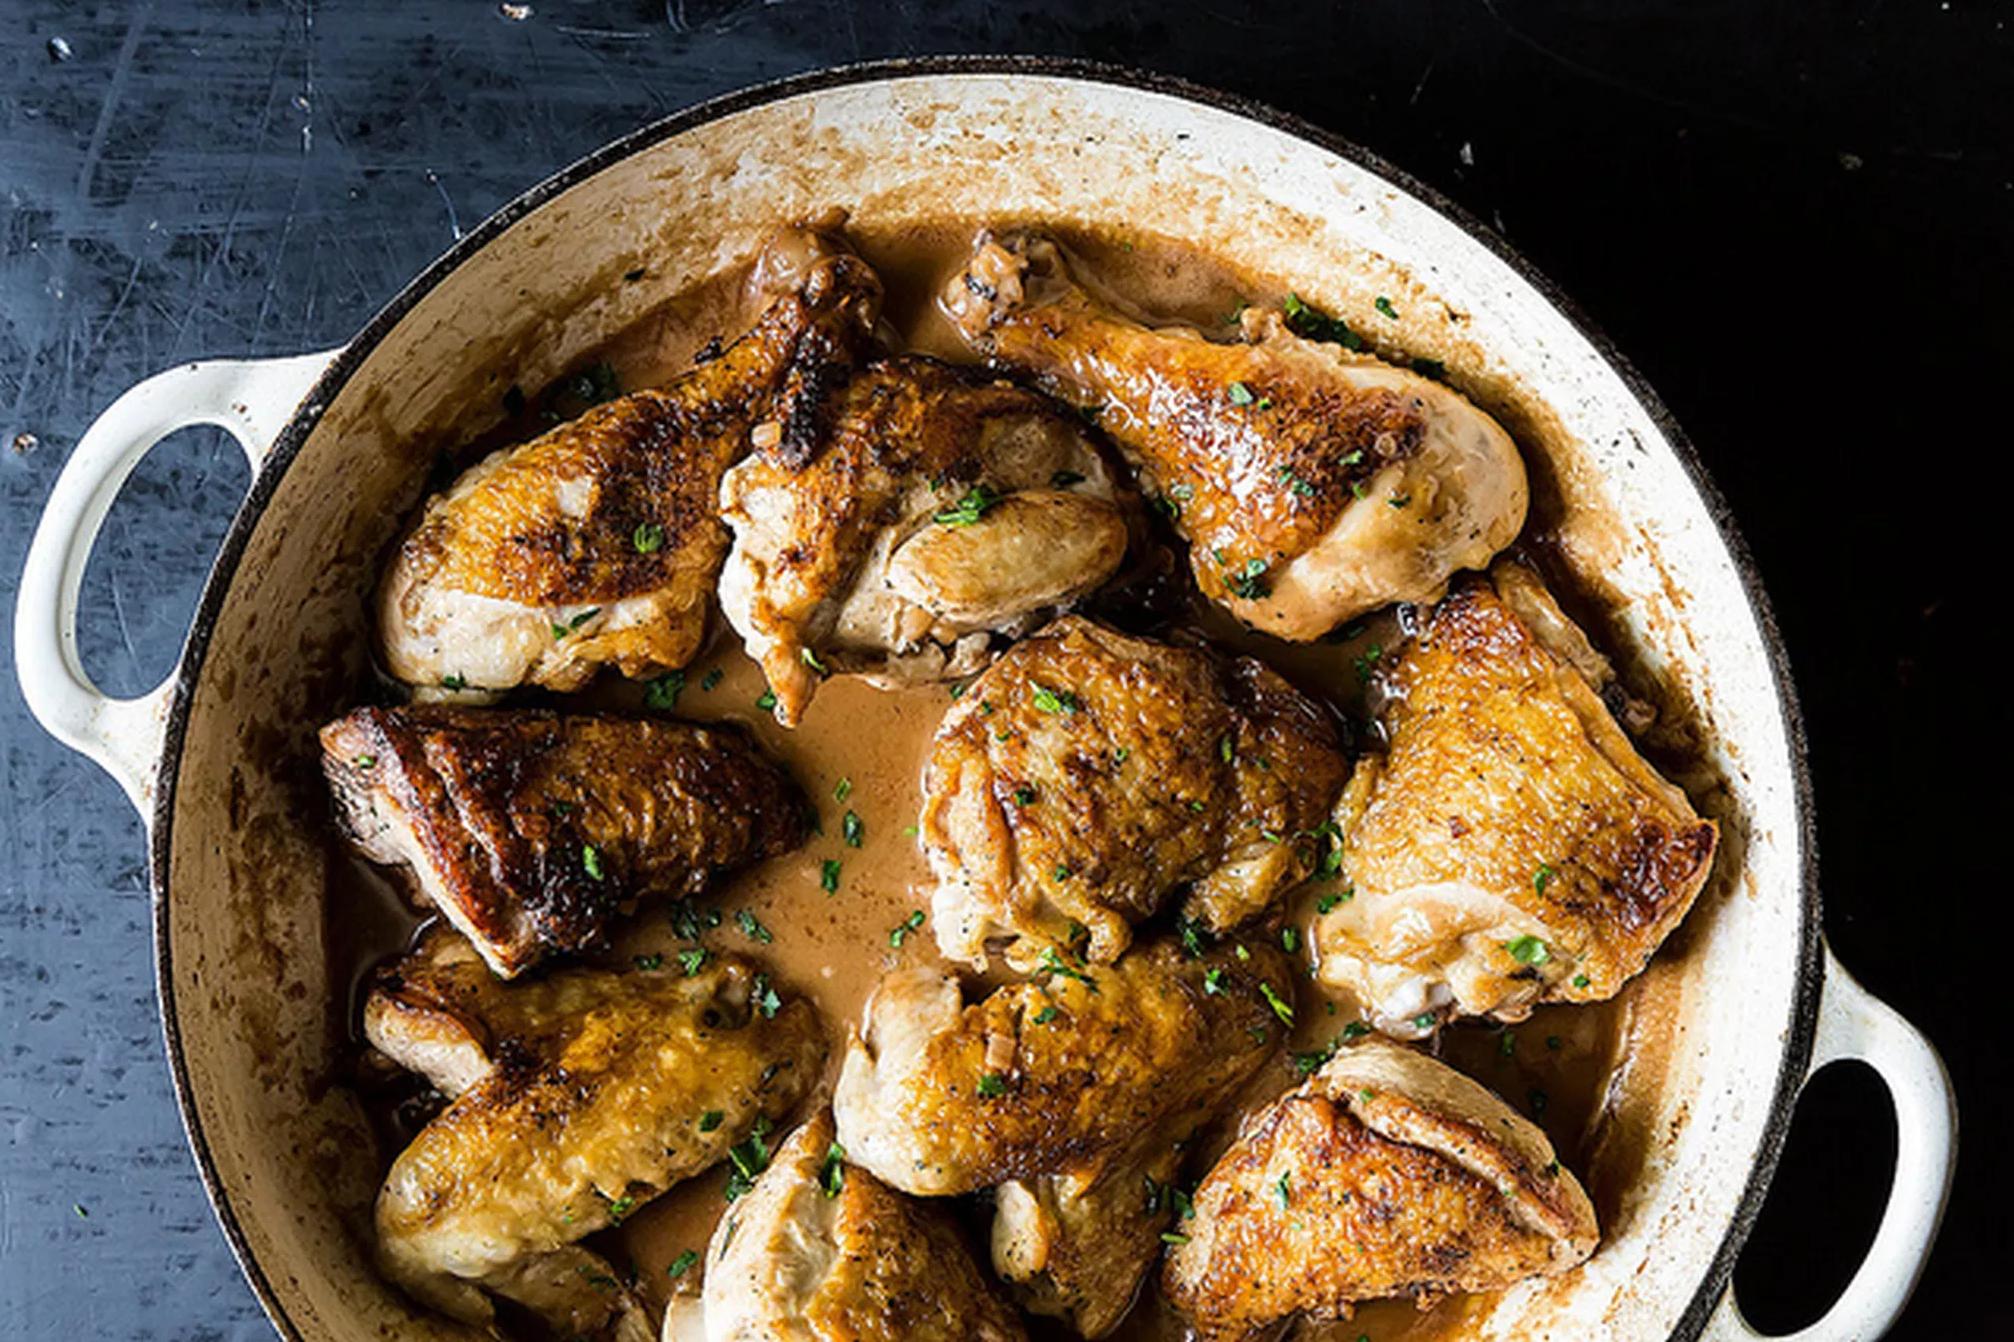  Let your chicken bask in a bath of red wine vinegar and spices for a dish that will have everyone asking for seconds.